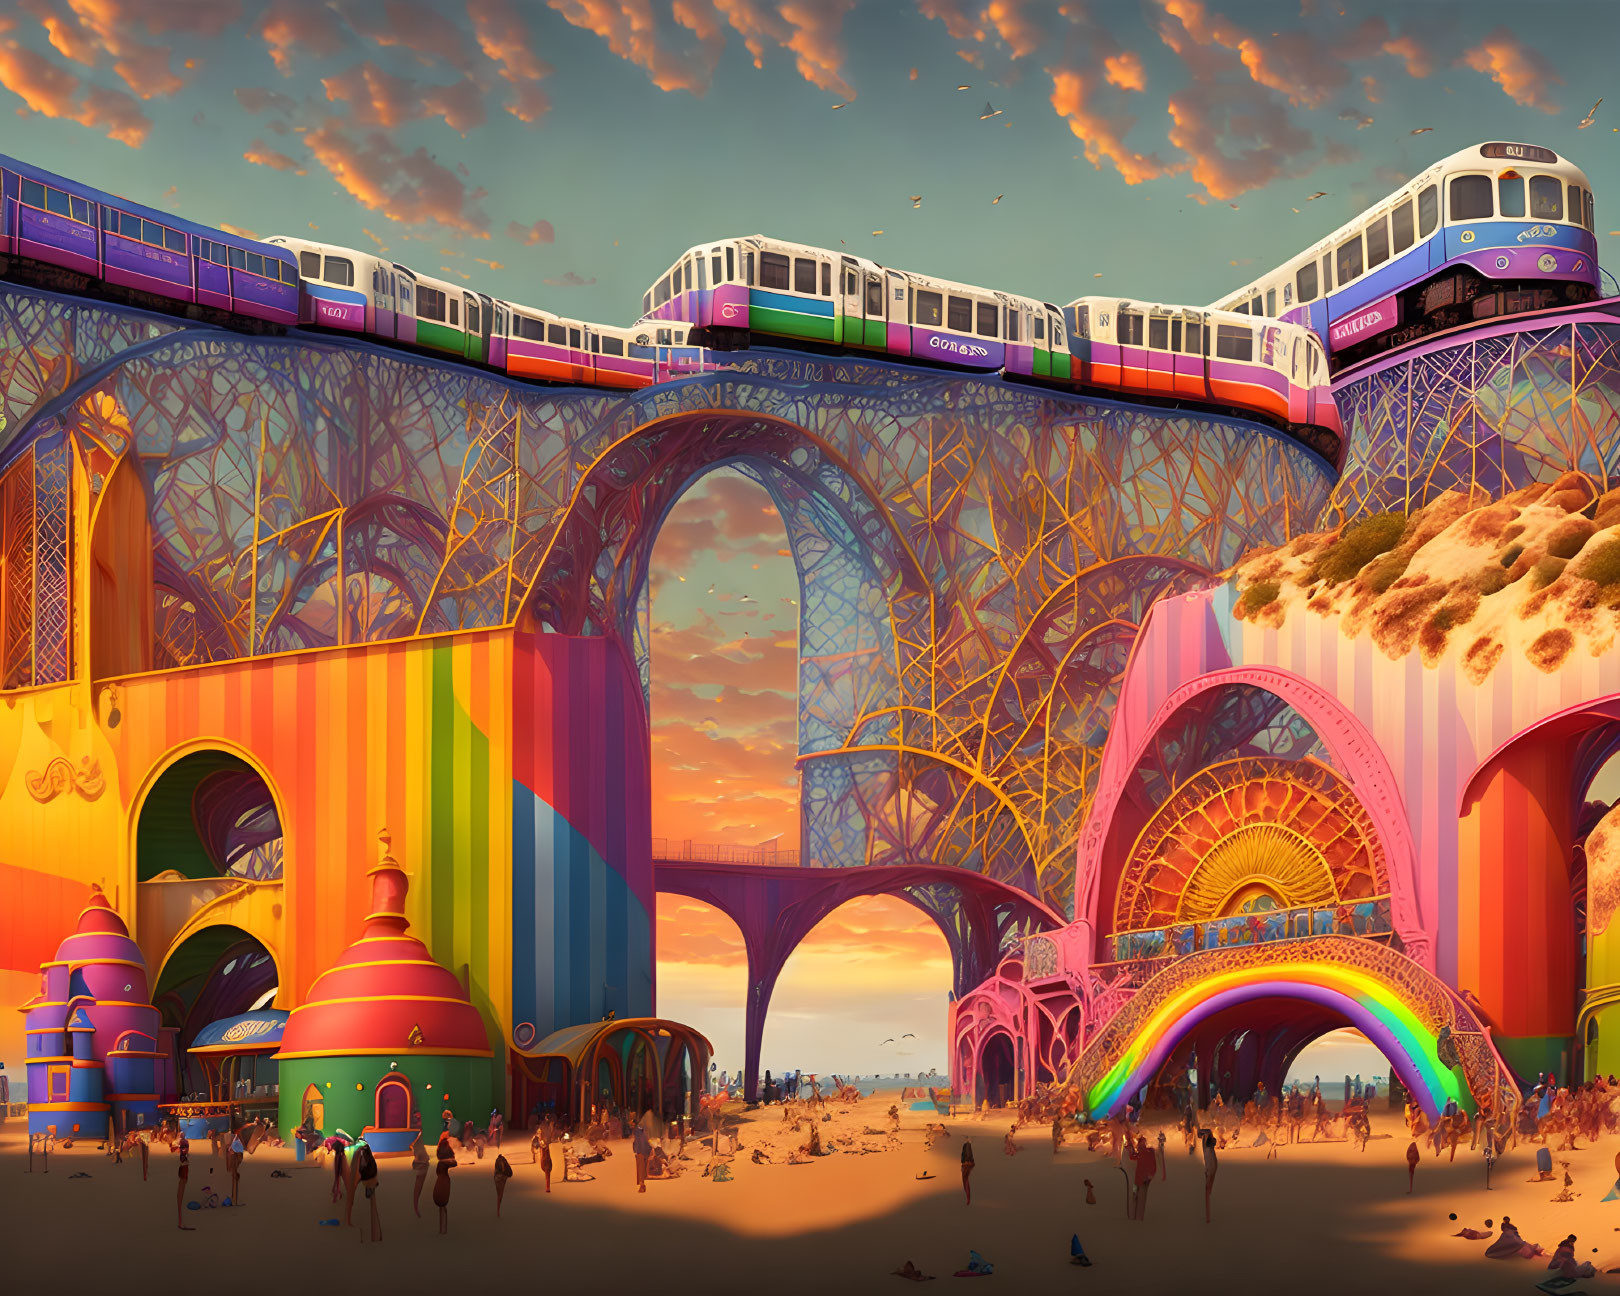 Colorful futuristic cityscape with Eiffel Tower-like structure and monorail trains at sunset.